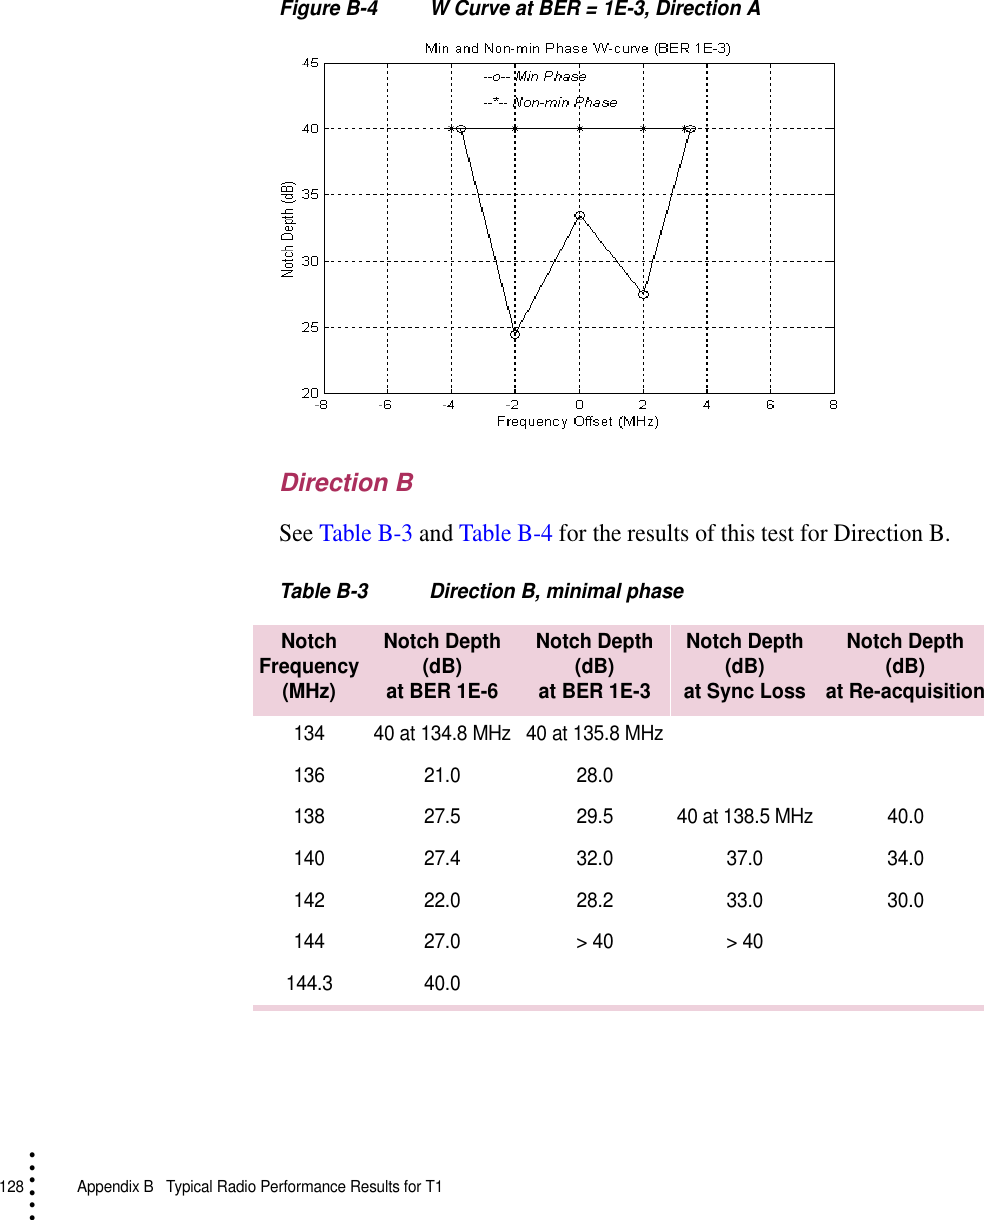 128   Appendix B  Typical Radio Performance Results for T1• • • •••Figure B-4 W Curve at BER = 1E-3, Direction ADirection BSee Table B-3 and Table B-4 for the results of this test for Direction B.Table B-3 Direction B, minimal phaseNotch Frequency (MHz)Notch Depth(dB)at BER 1E-6Notch Depth(dB)at BER 1E-3Notch Depth(dB)at Sync LossNotch Depth(dB)at Re-acquisition134 40 at 134.8 MHz 40 at 135.8 MHz136 21.0 28.0138 27.5 29.5 40 at 138.5 MHz 40.0140 27.4 32.0 37.0 34.0142 22.0 28.2 33.0 30.0144 27.0 &gt; 40 &gt; 40144.3 40.0